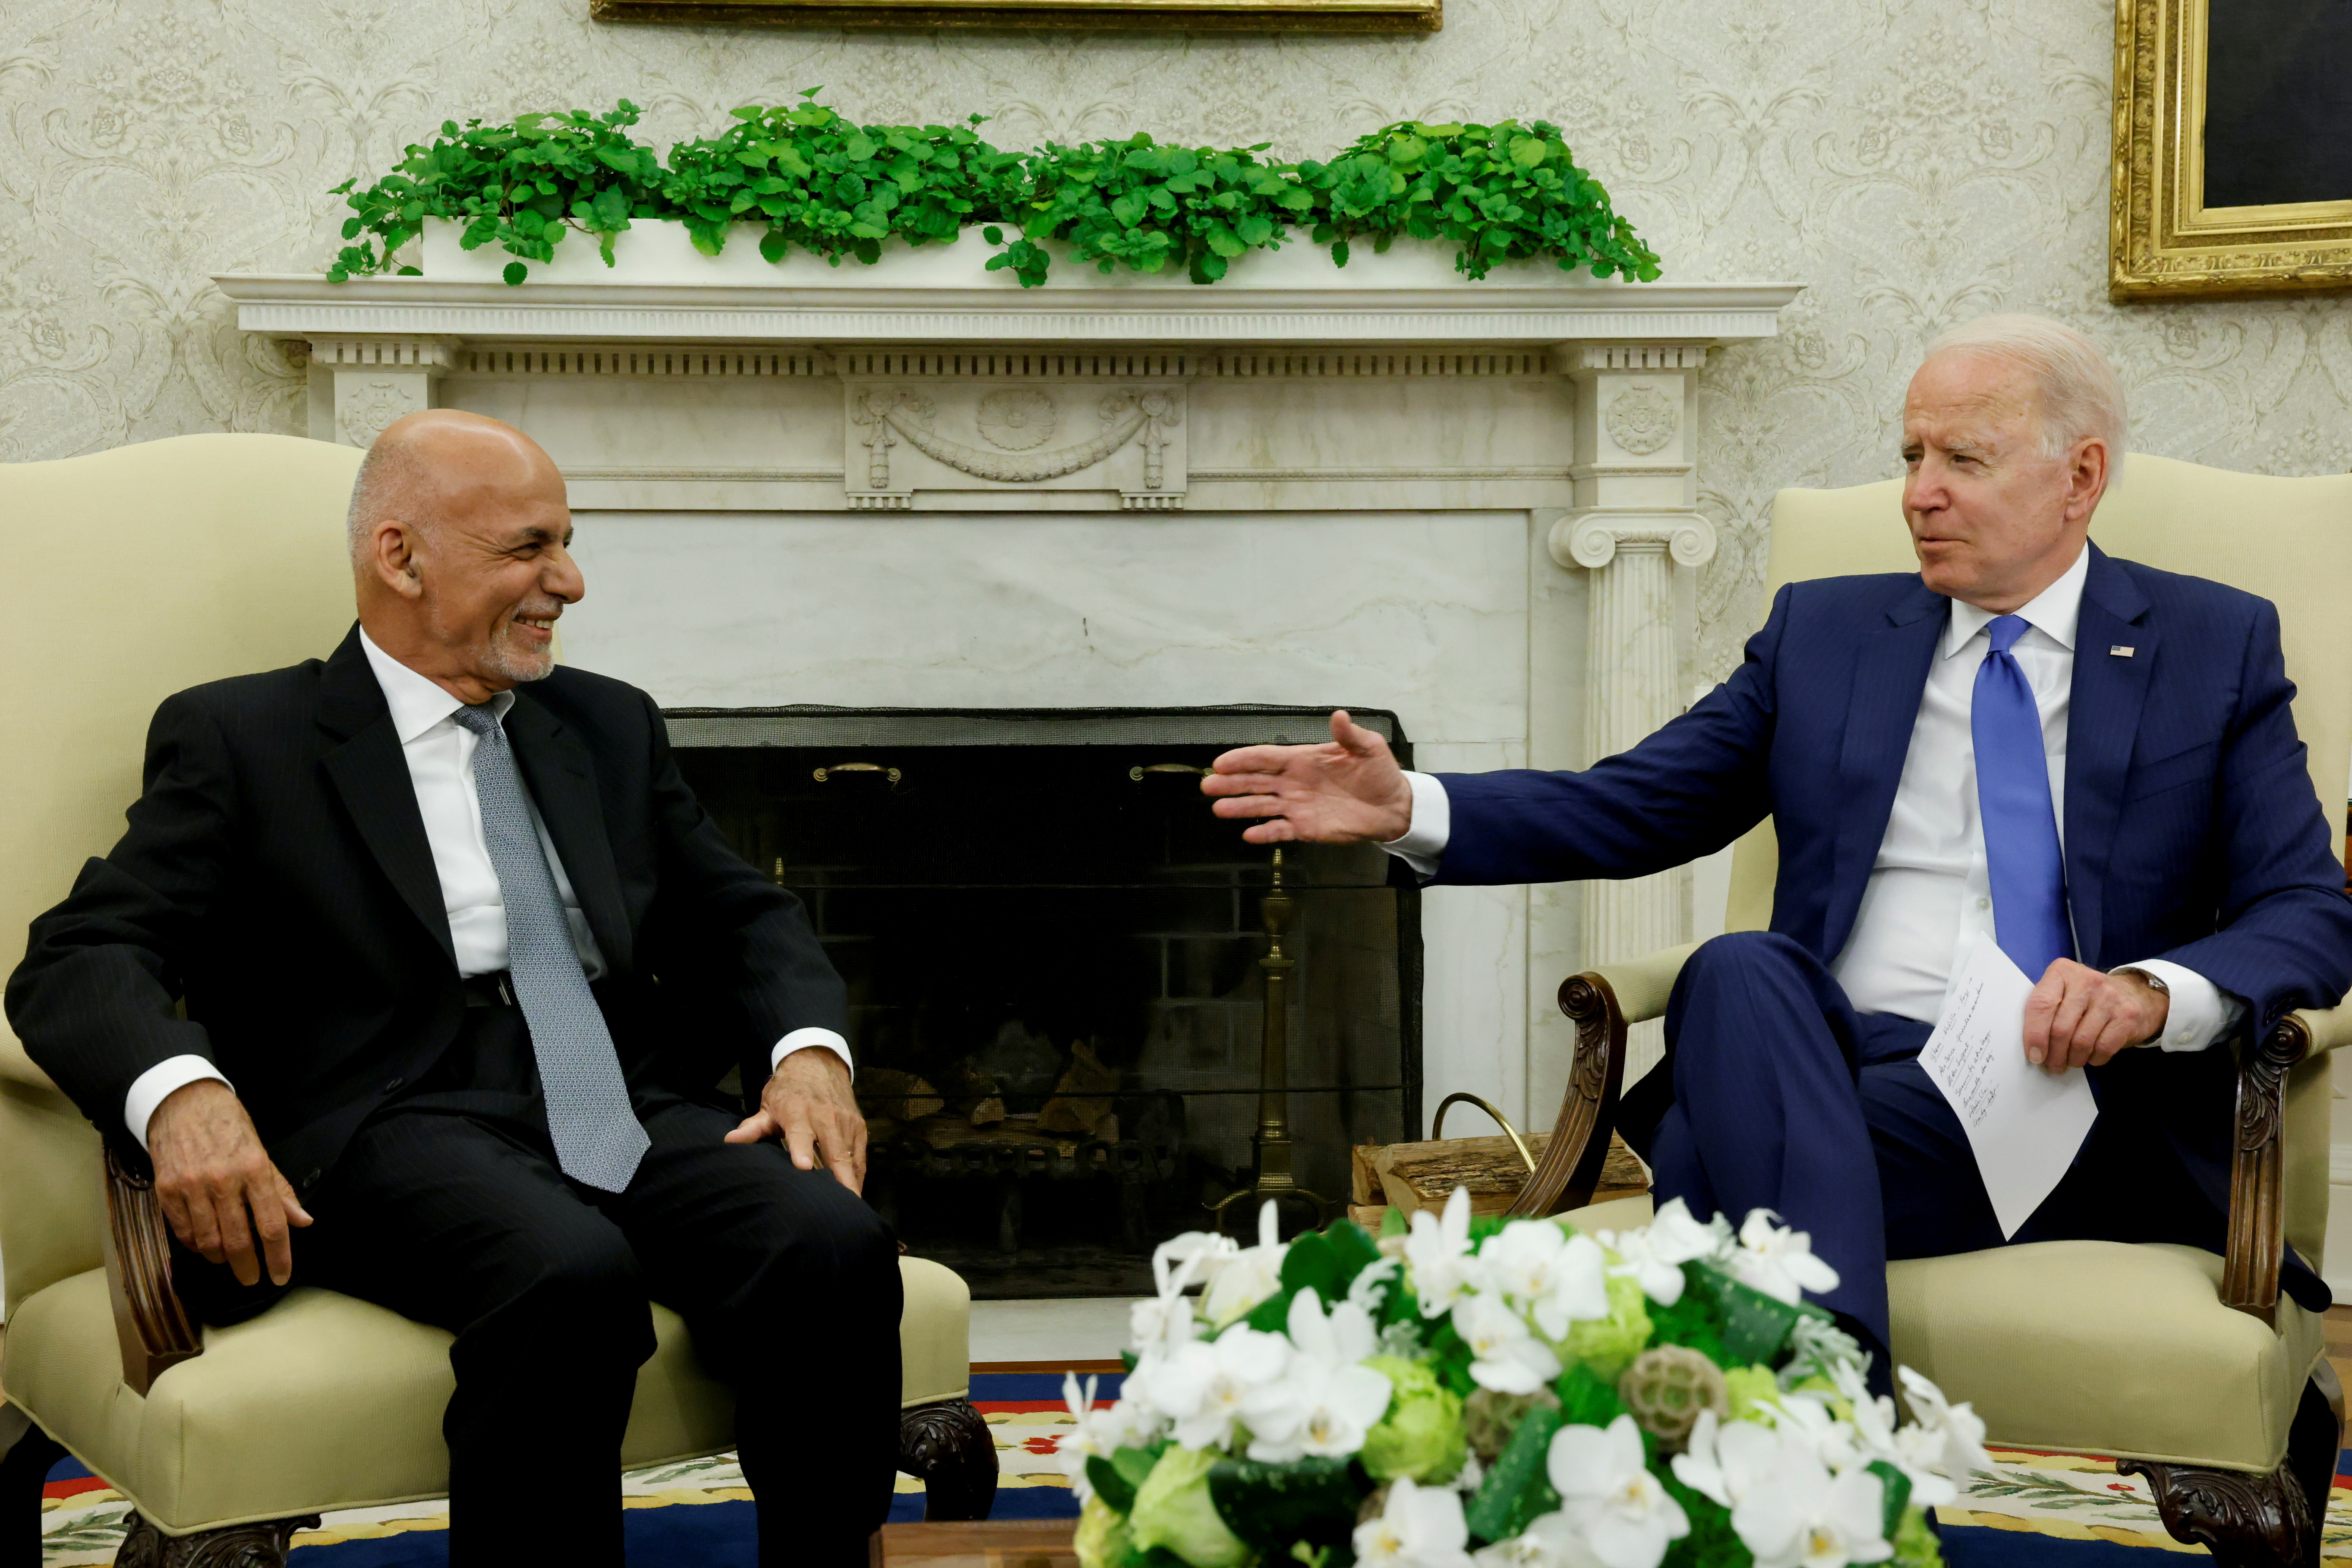 U.S. President Biden meets with Afghan President Ghani and Chairman of Afghanistan's High Council for National Reconciliation Abdullah in Washington